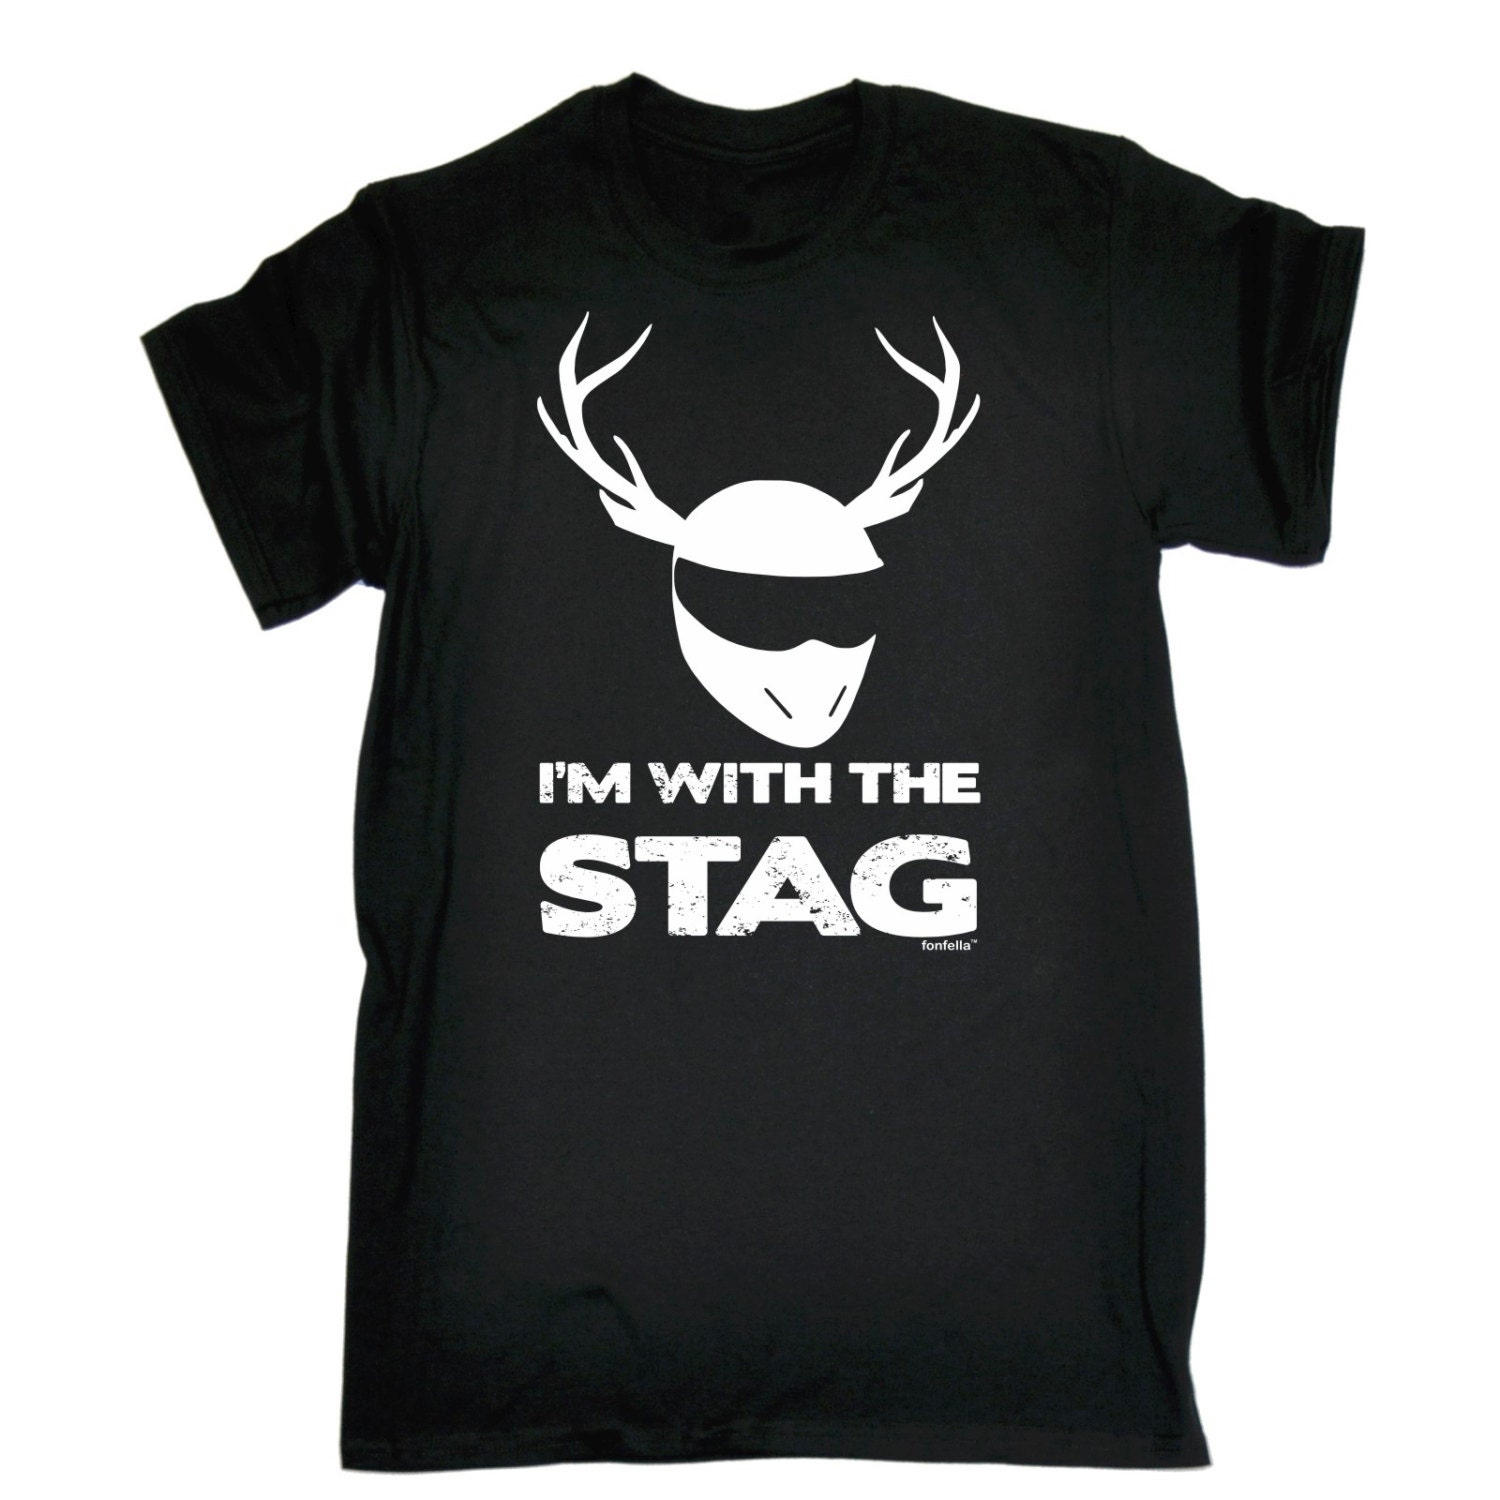 I'm With Stag T-Shirt Funny Slogan Joke tee by OneTwoThreeT